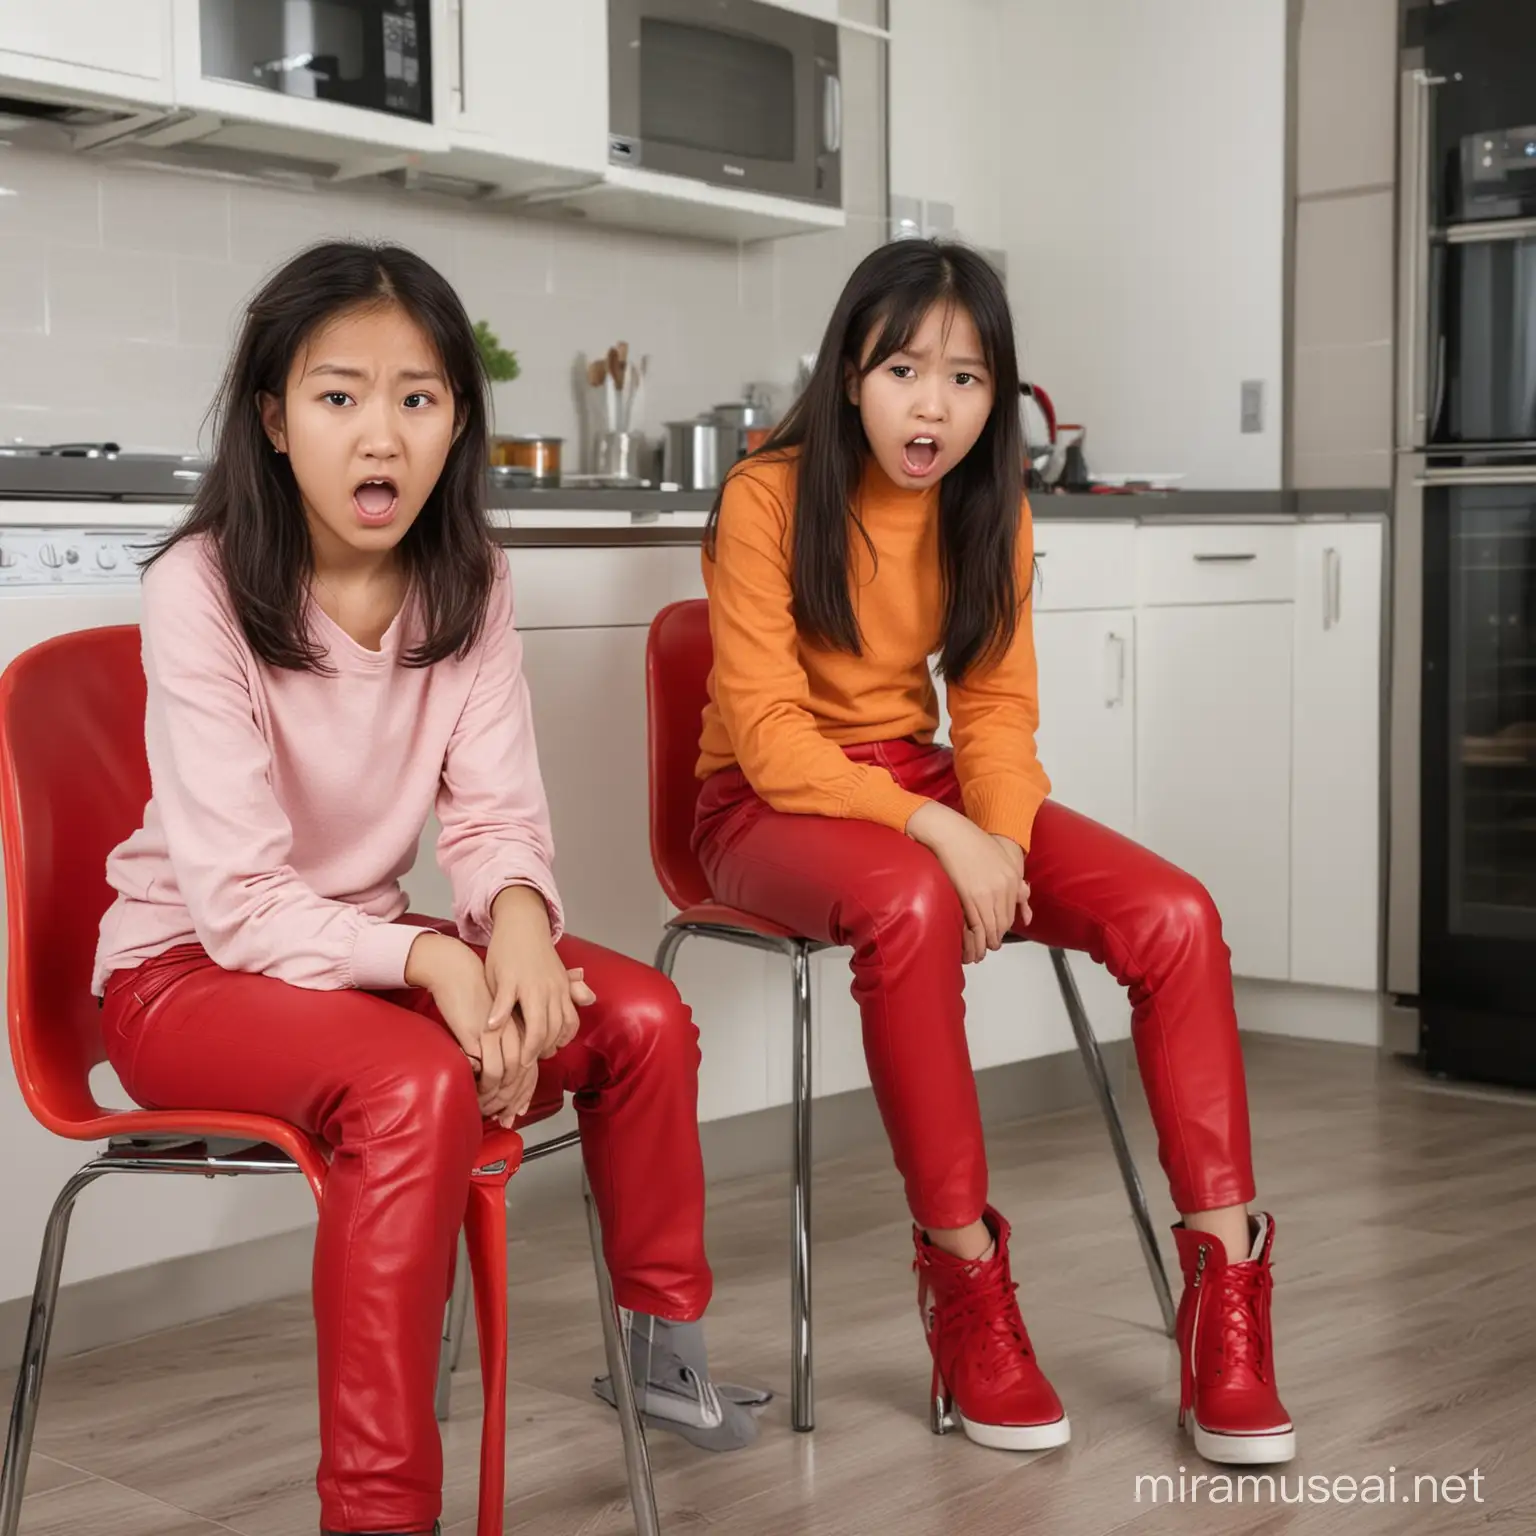 Two Angry Asian Girls in Red Leather Pants Sitting in Kitchen Chairs